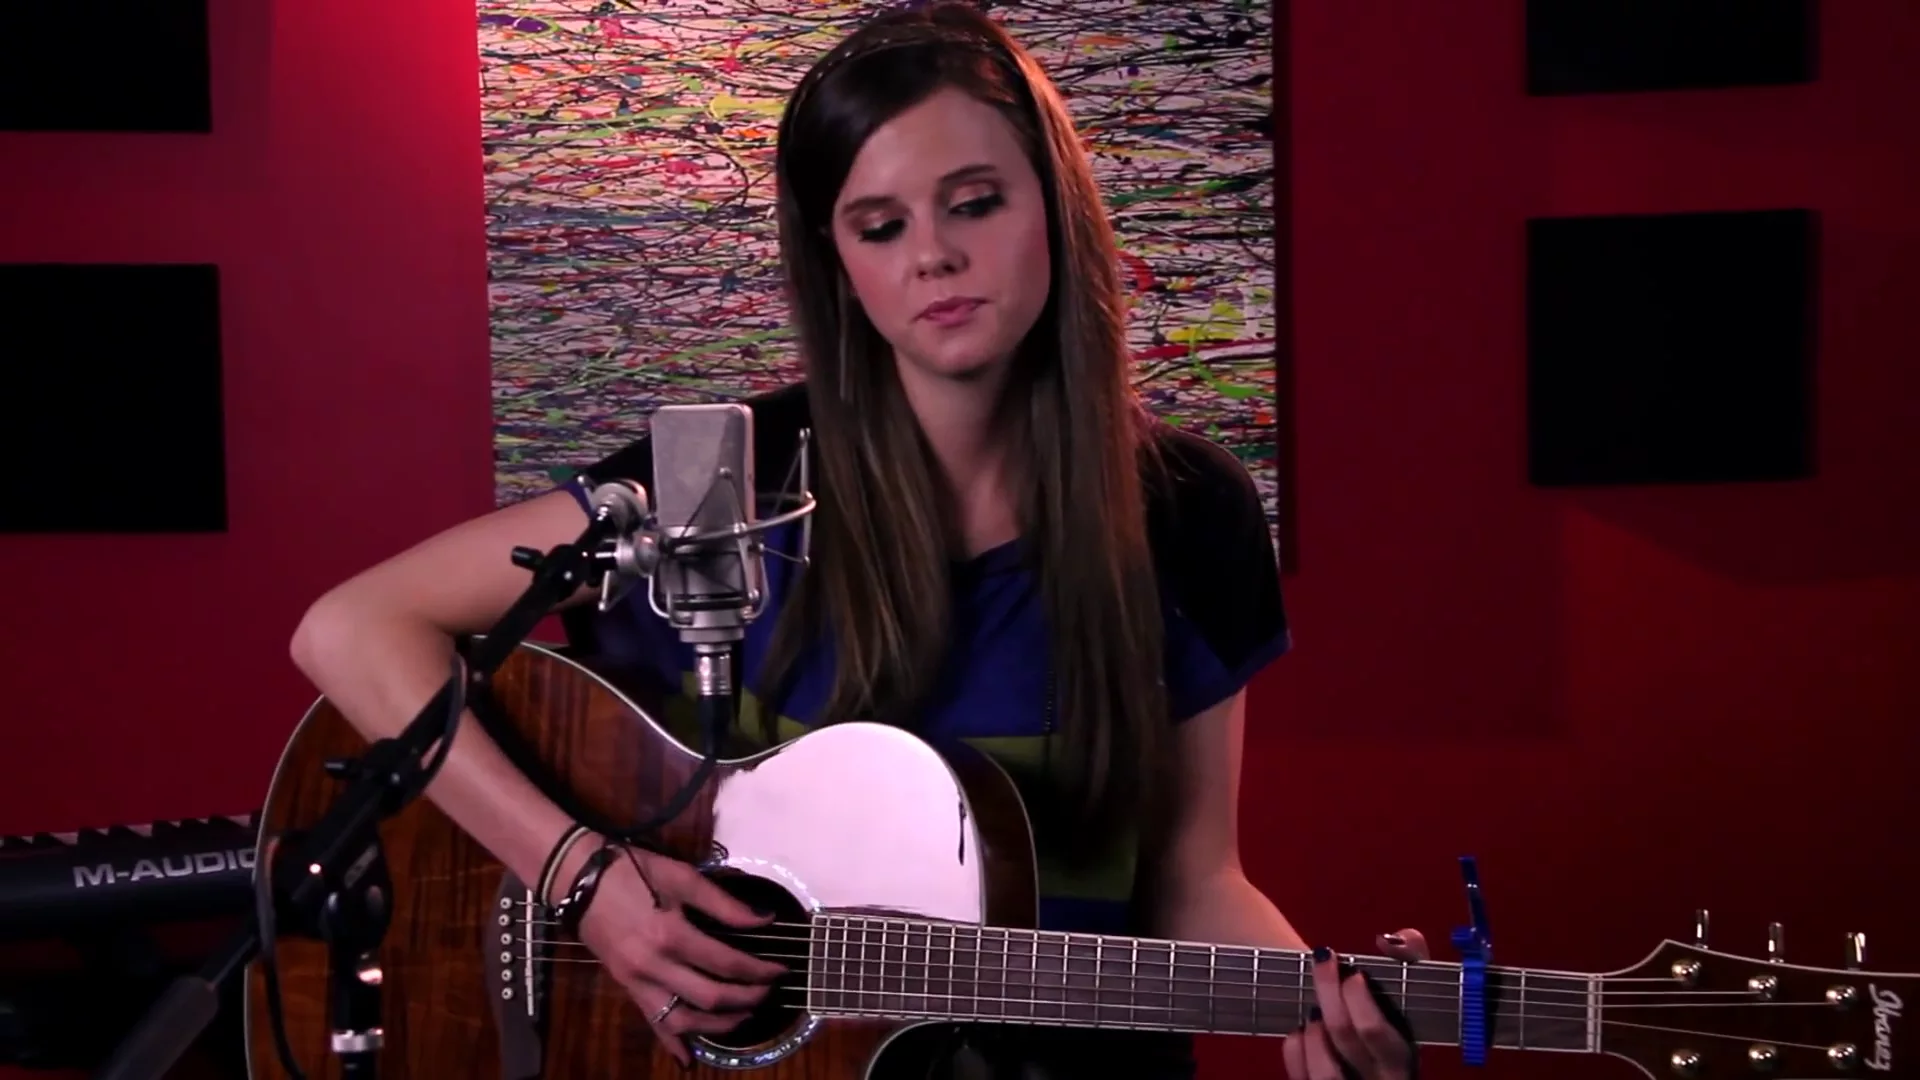 Wide Awake - Katy Perry (Cover by Tiffany Alvord) Official Cover Music Video